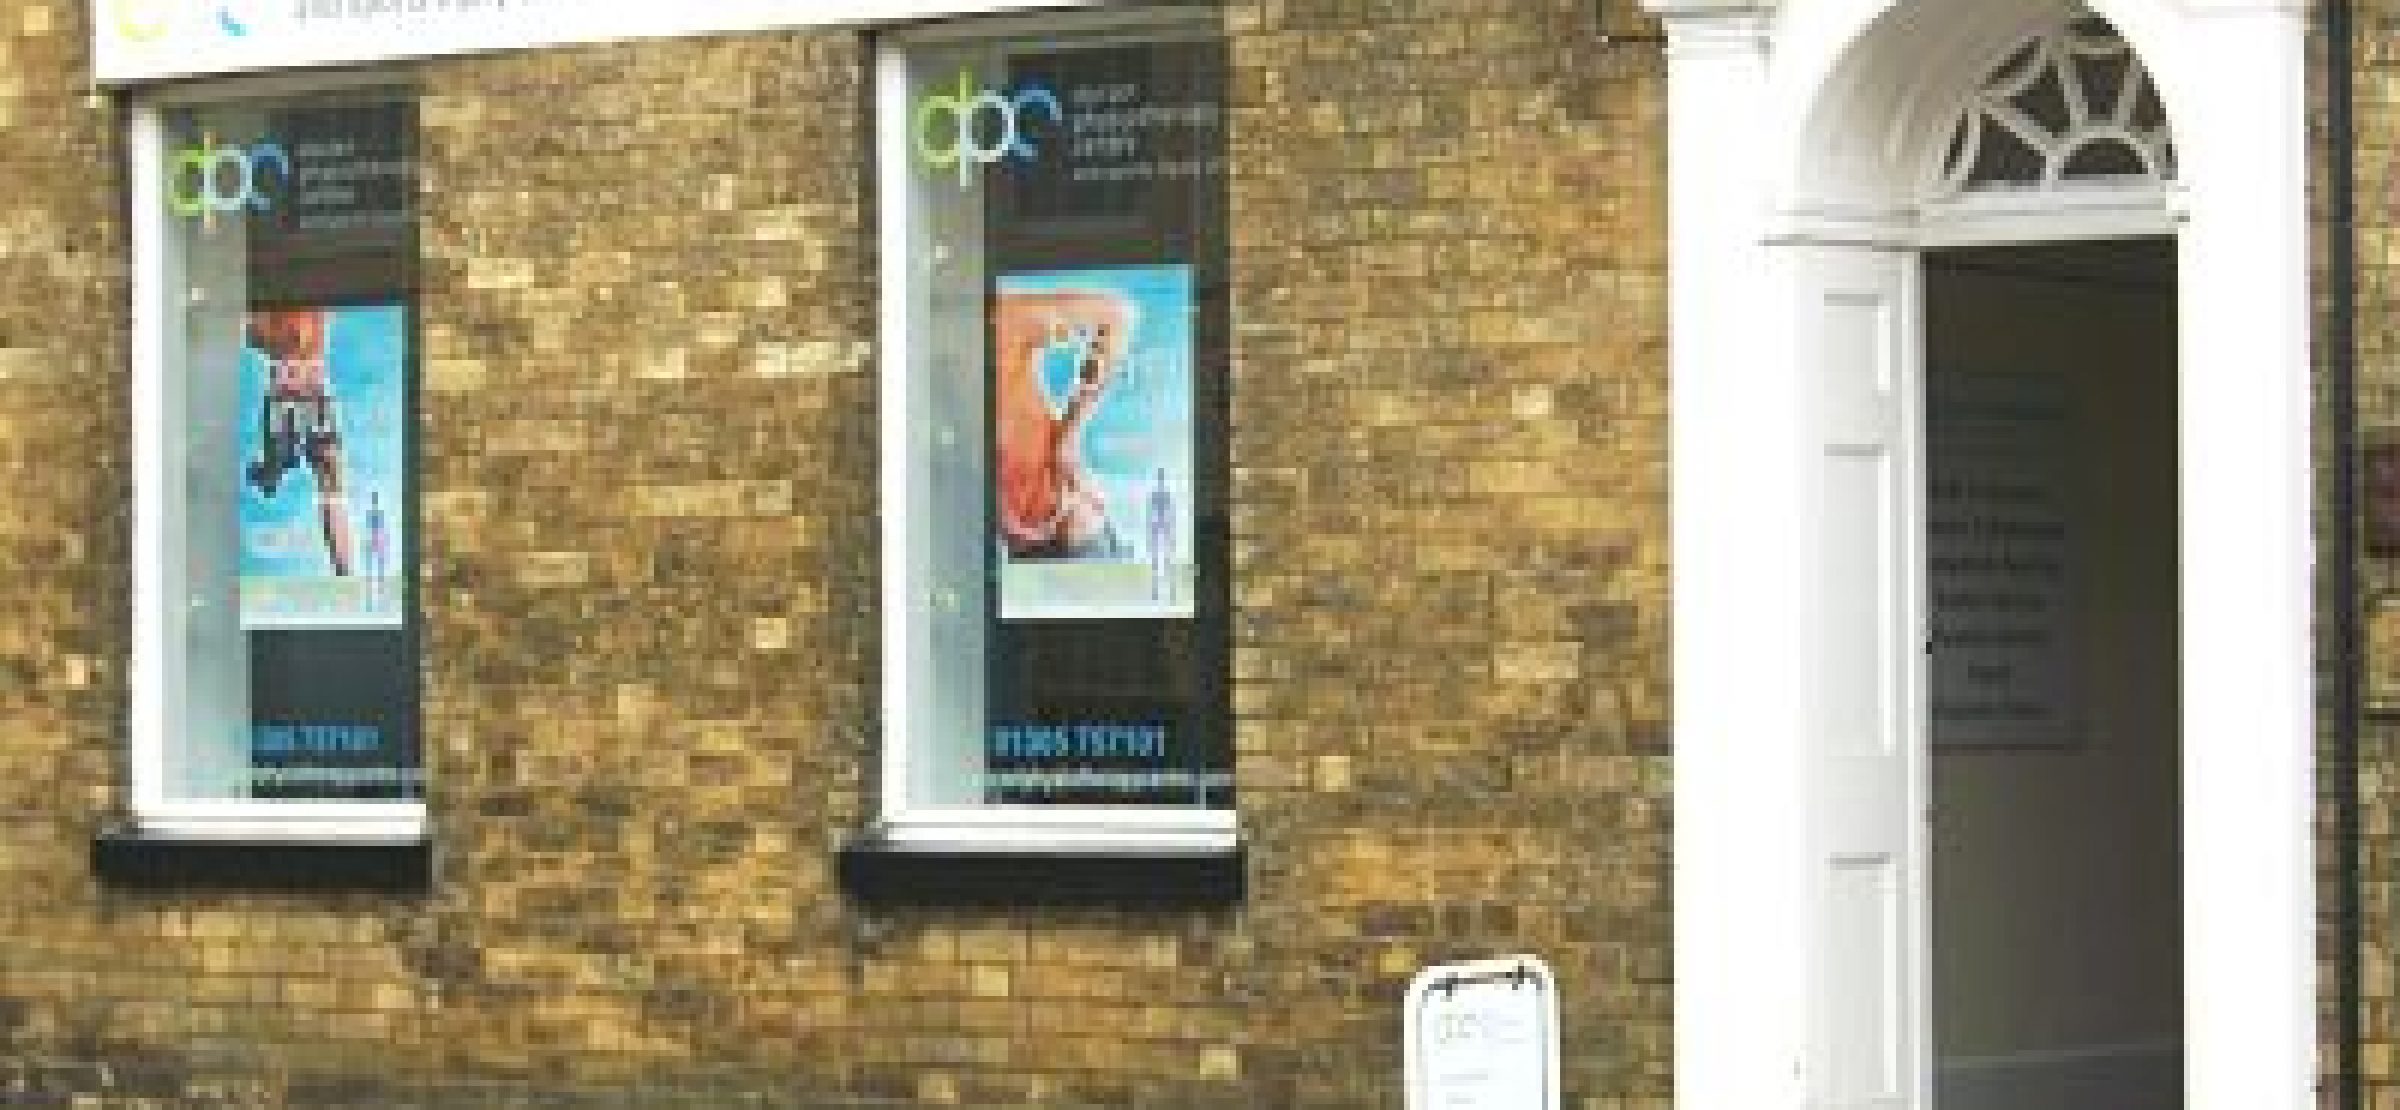 Dorset Physiotherapy Centre